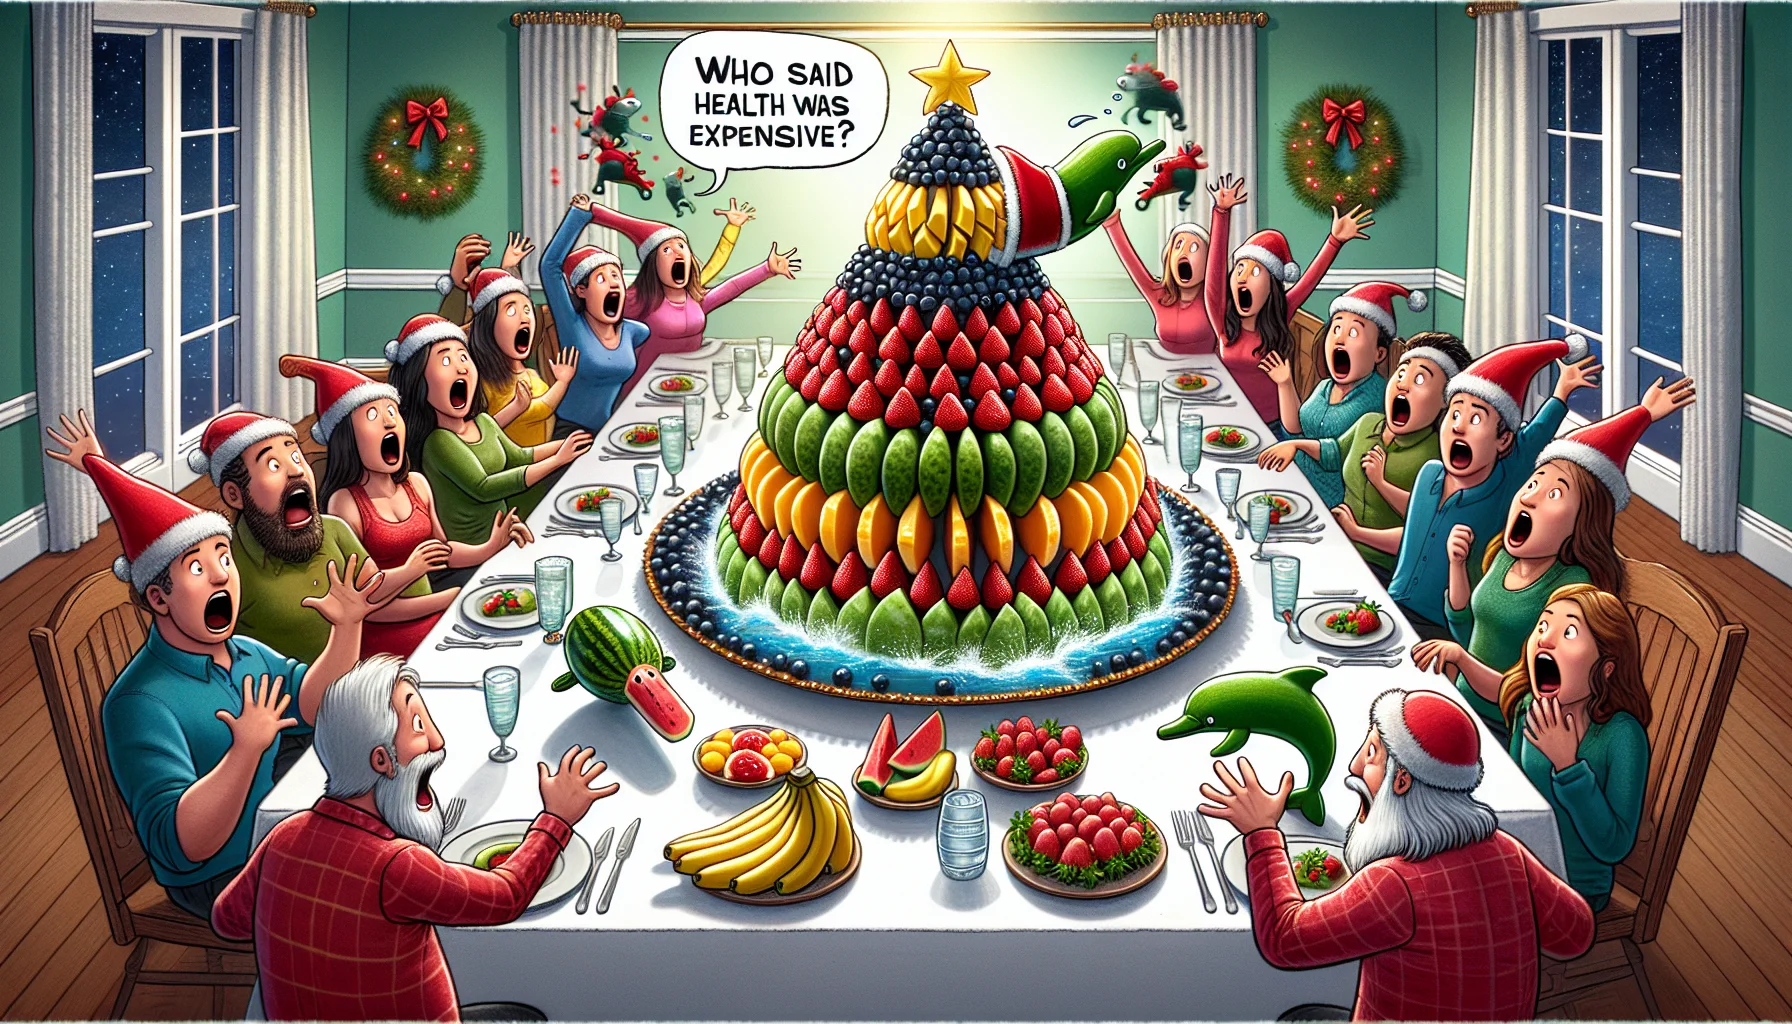 A humorous scene unfolds in a festive dining room. The main feature is an impressive fruit tray, artfully arranged to resemble miniature holiday landscapes. There are pyramids of plump strawberries and mangoes as Christmas trees, banana dolphins leaping over a blueberry ocean, and a watermelon Santa Claus riding a cantaloupe sleigh. Around the table, an array of shocked and delighted people of various descents and genders launch themselves towards the fruit, jaws dropping, eyes sparkling with joy and hands reaching for the deliciousness. The caption reads: 'Who said eating healthy was expensive?'